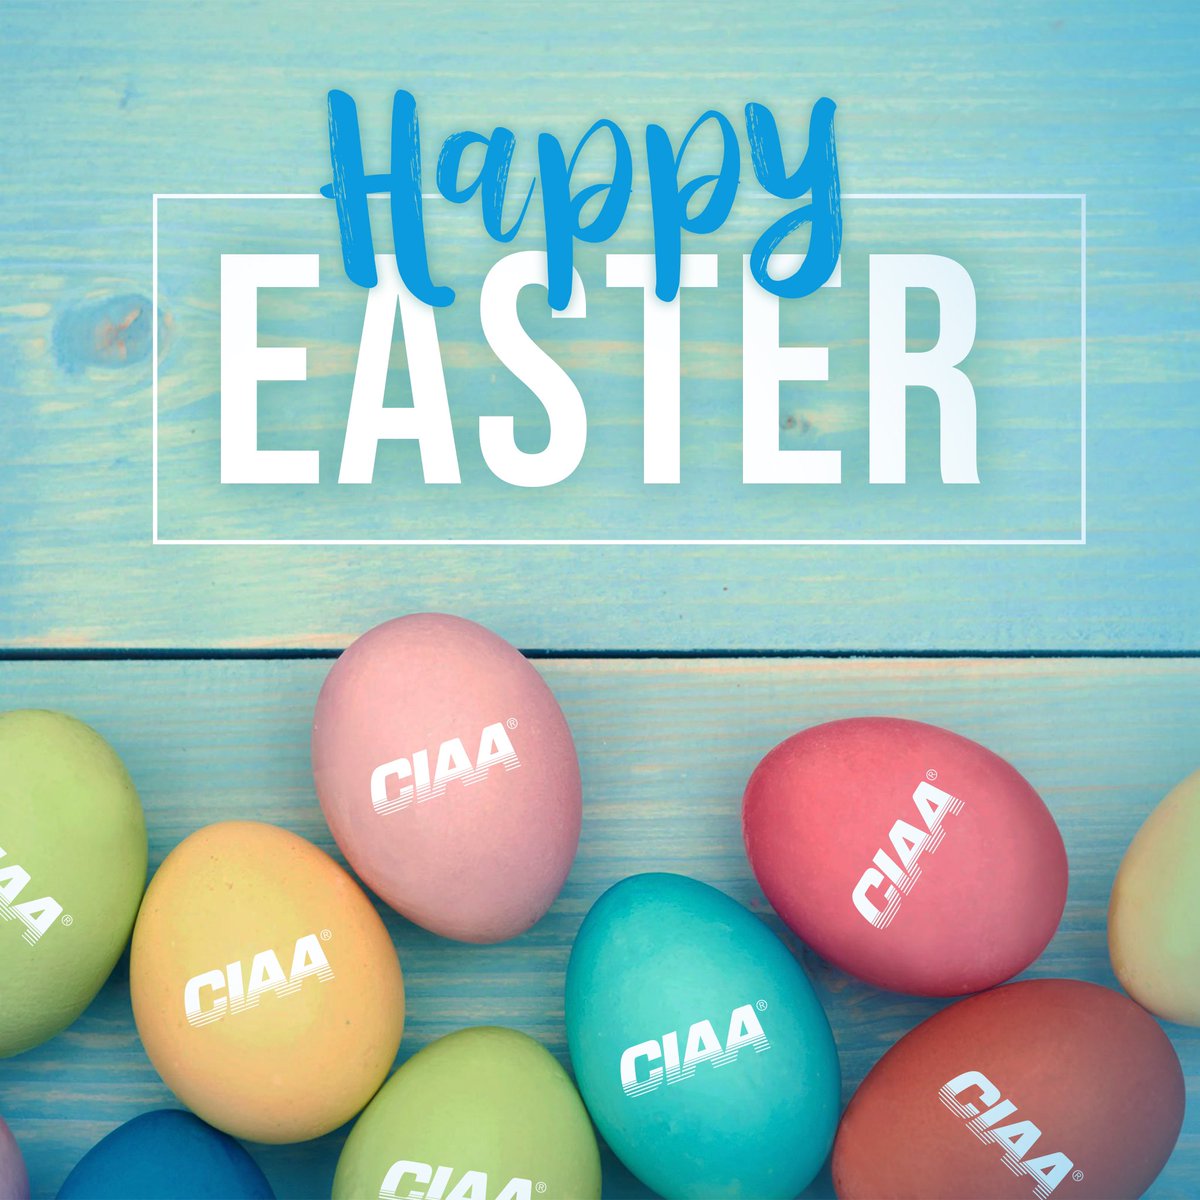 Happy Easter from our CIAA family to yours! #CIAAForLife 💐